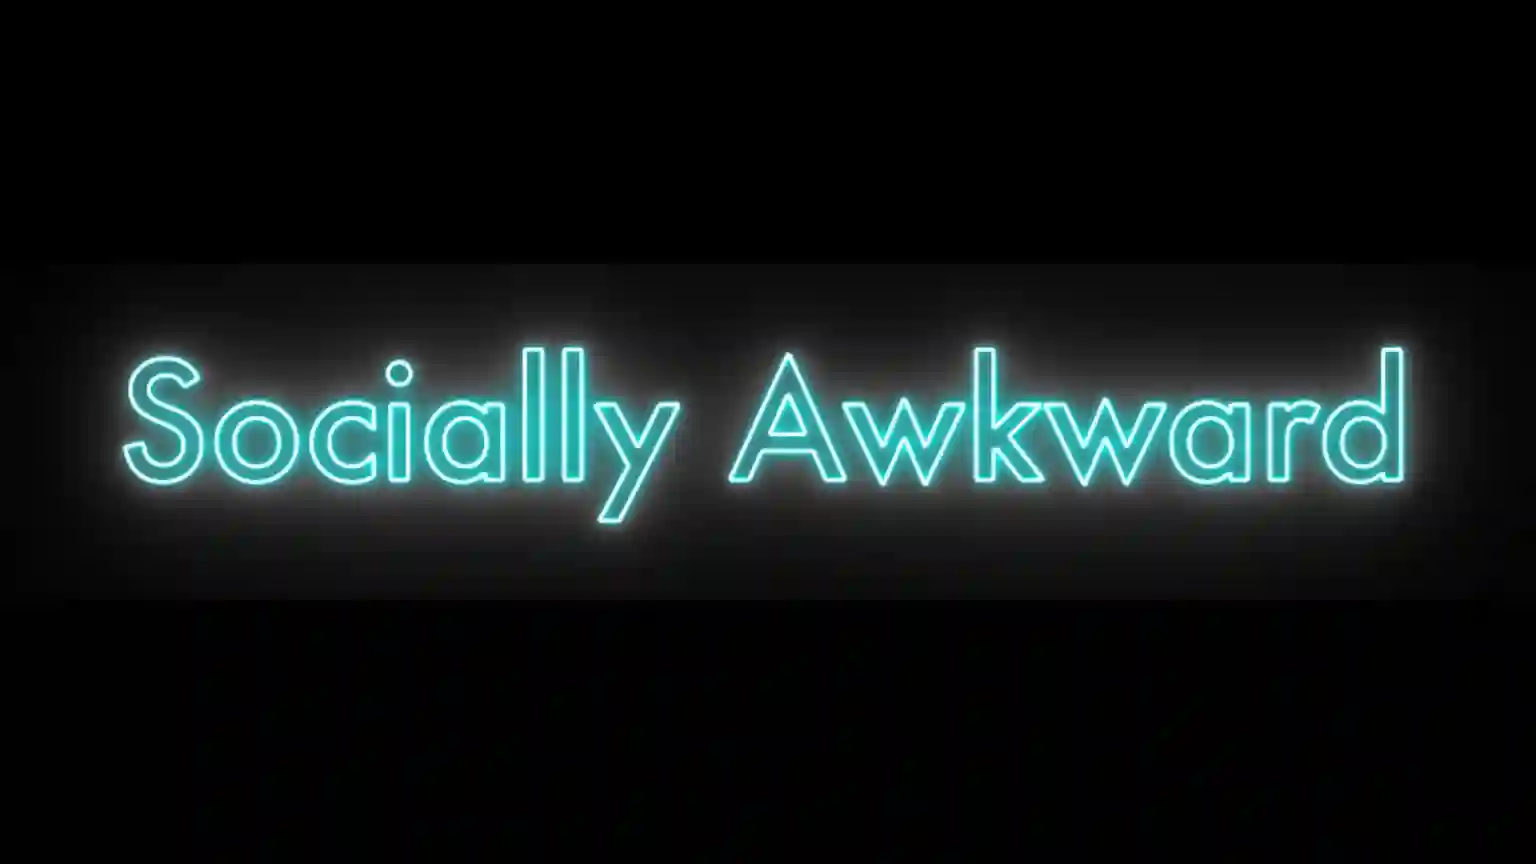 Navigating the social spaces if you think you are socially awkward